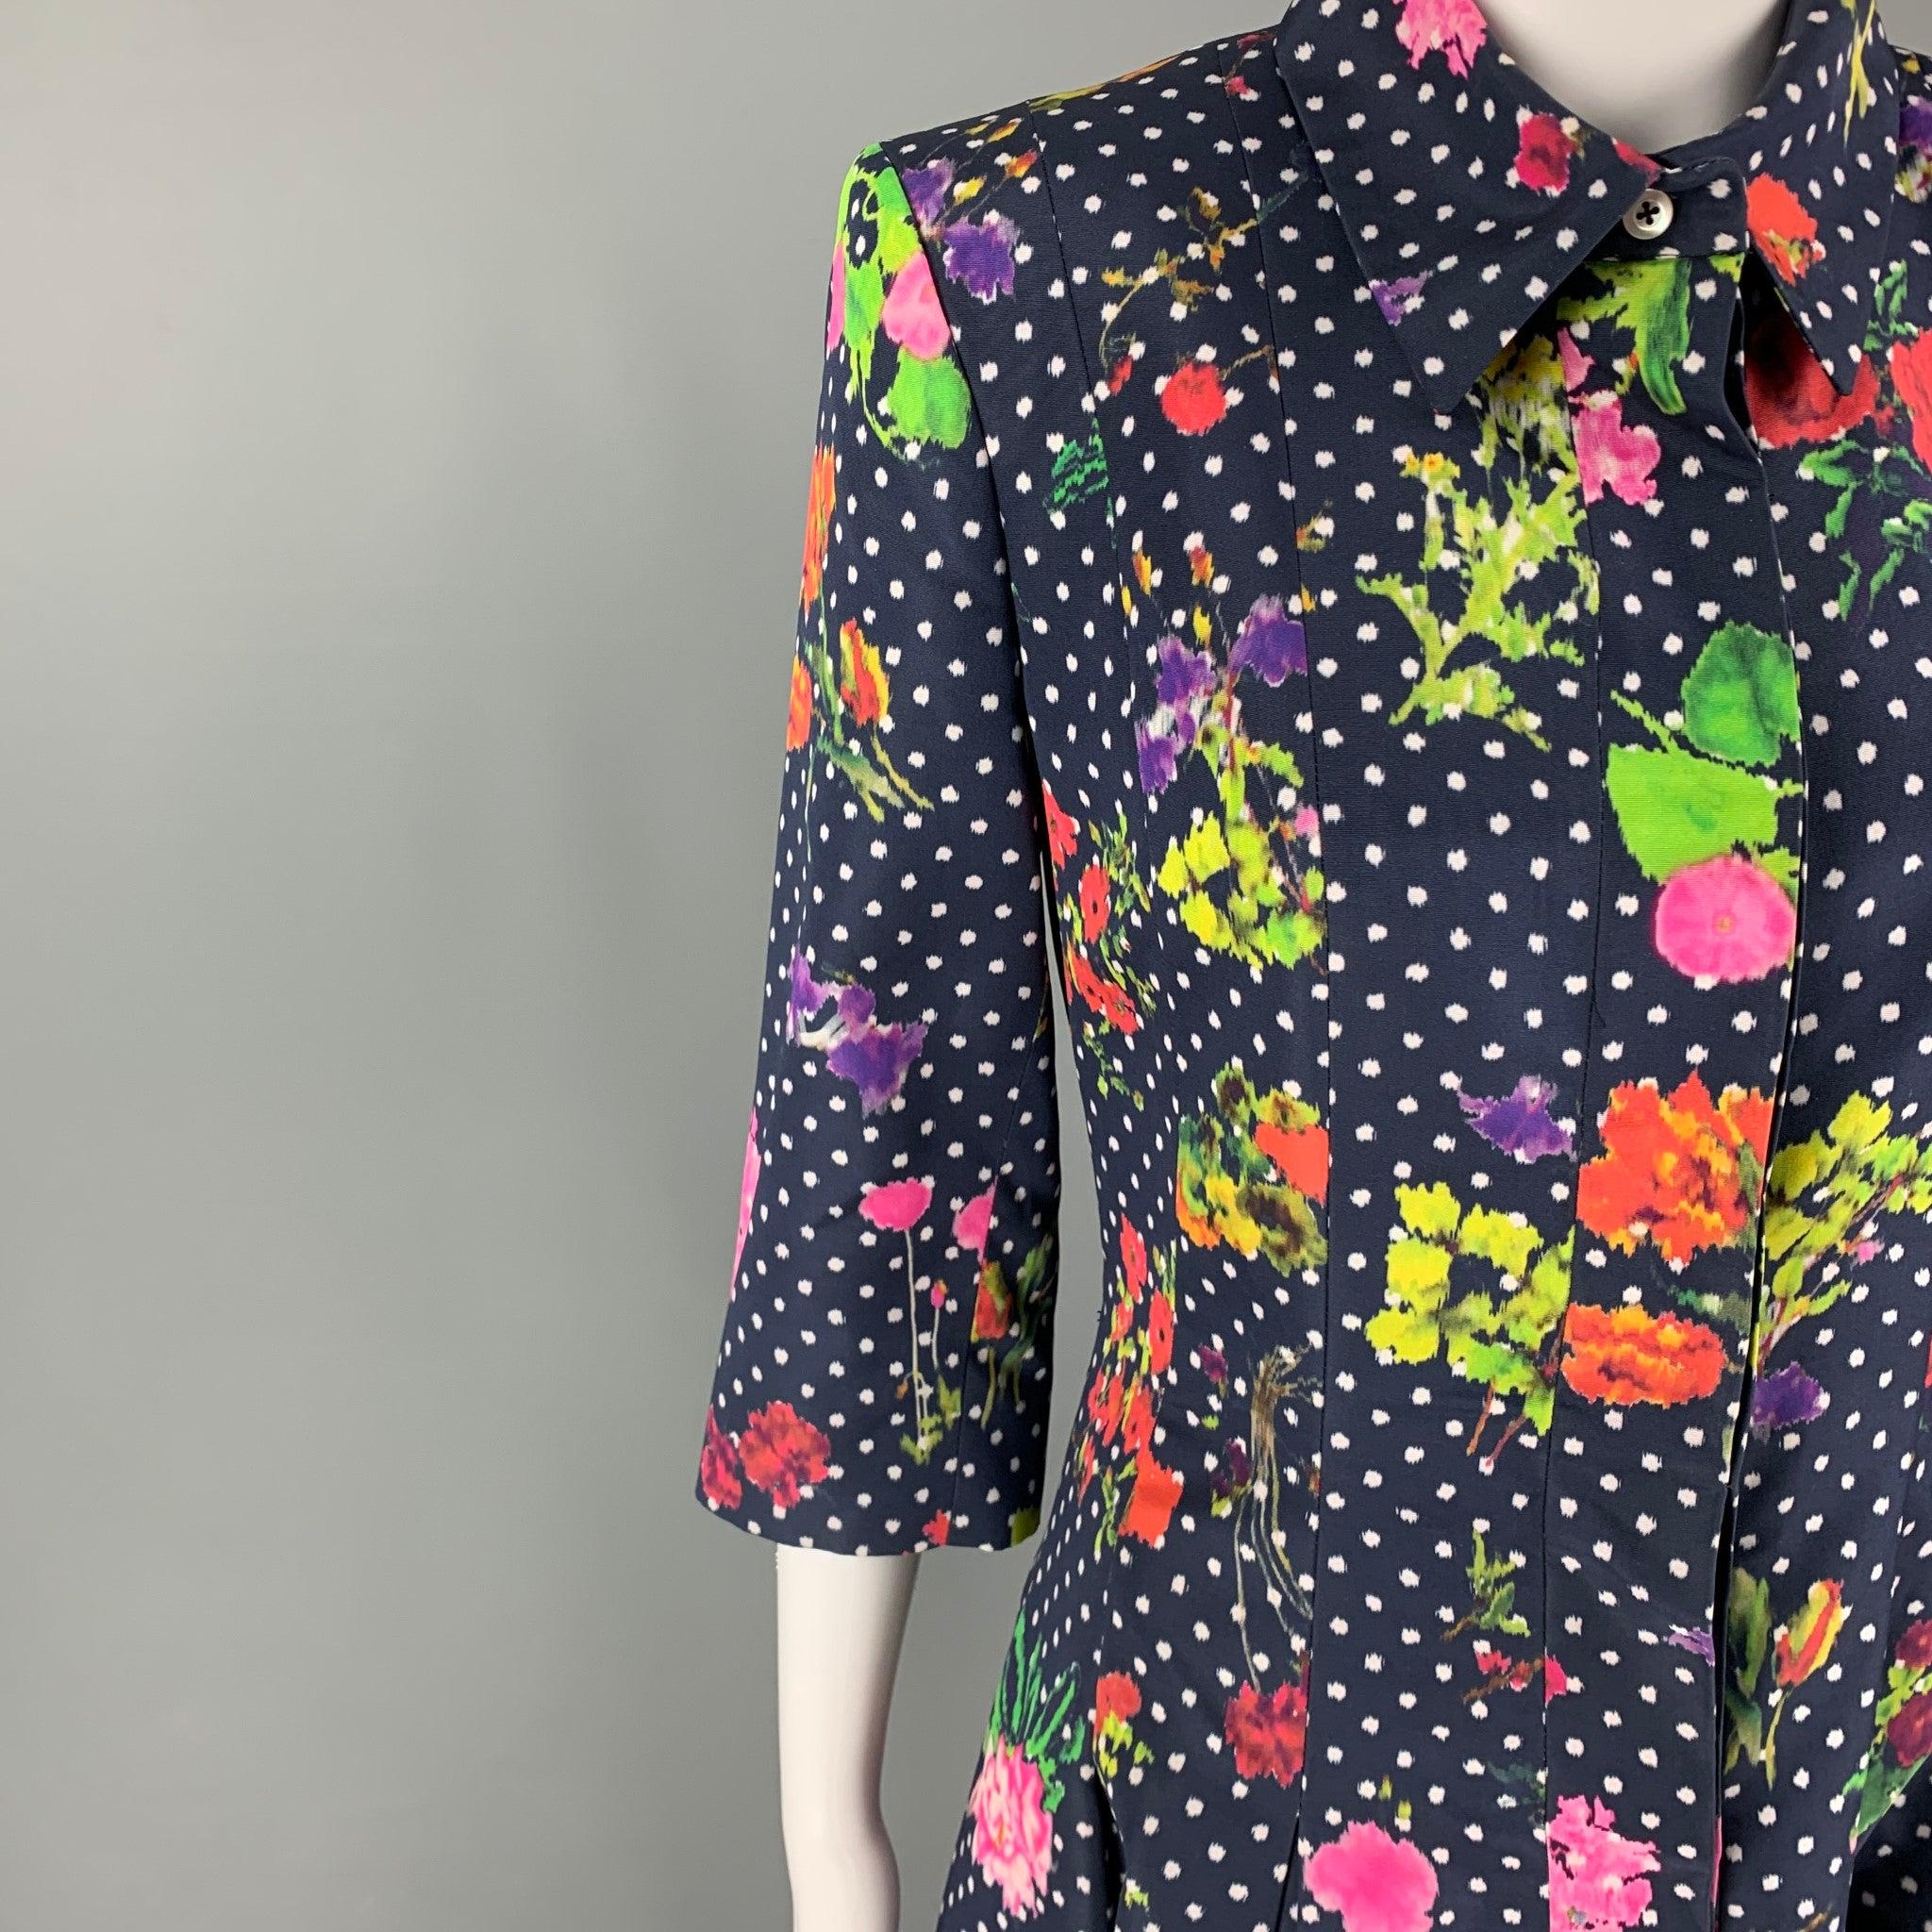 OSCAR DE LA DENTA coat comes in a multi-color floral silk featuring a full skirt design, pointed collar, and a hidden placket closure.
Excellent Pre-Owned Condition. 

Marked:   6 

Measurements: 
 
Shoulder: 15.5 inches Bust: 34 inches Sleeve: 17.5